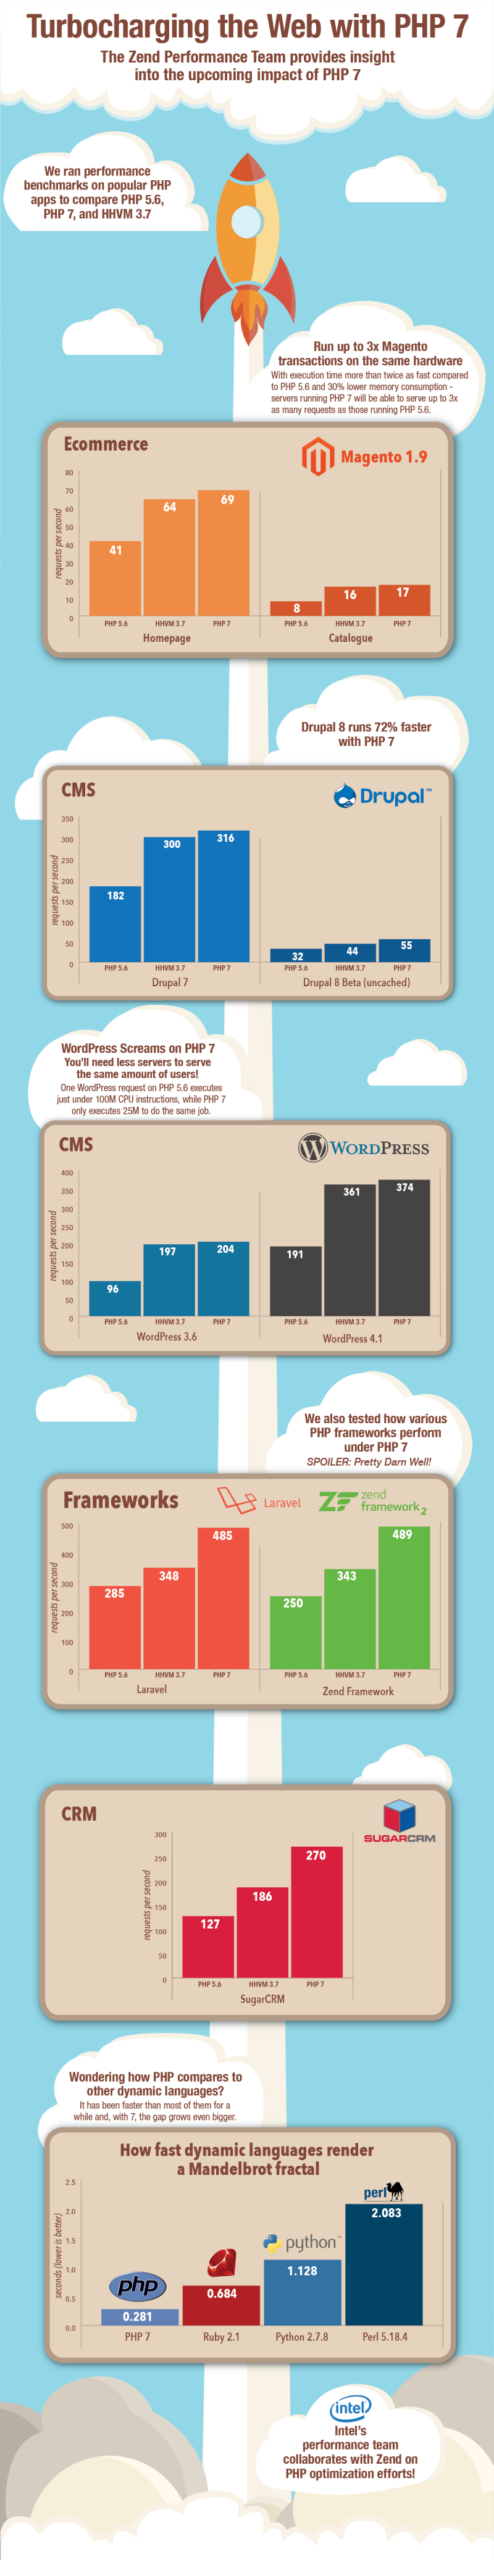 php7 infographic